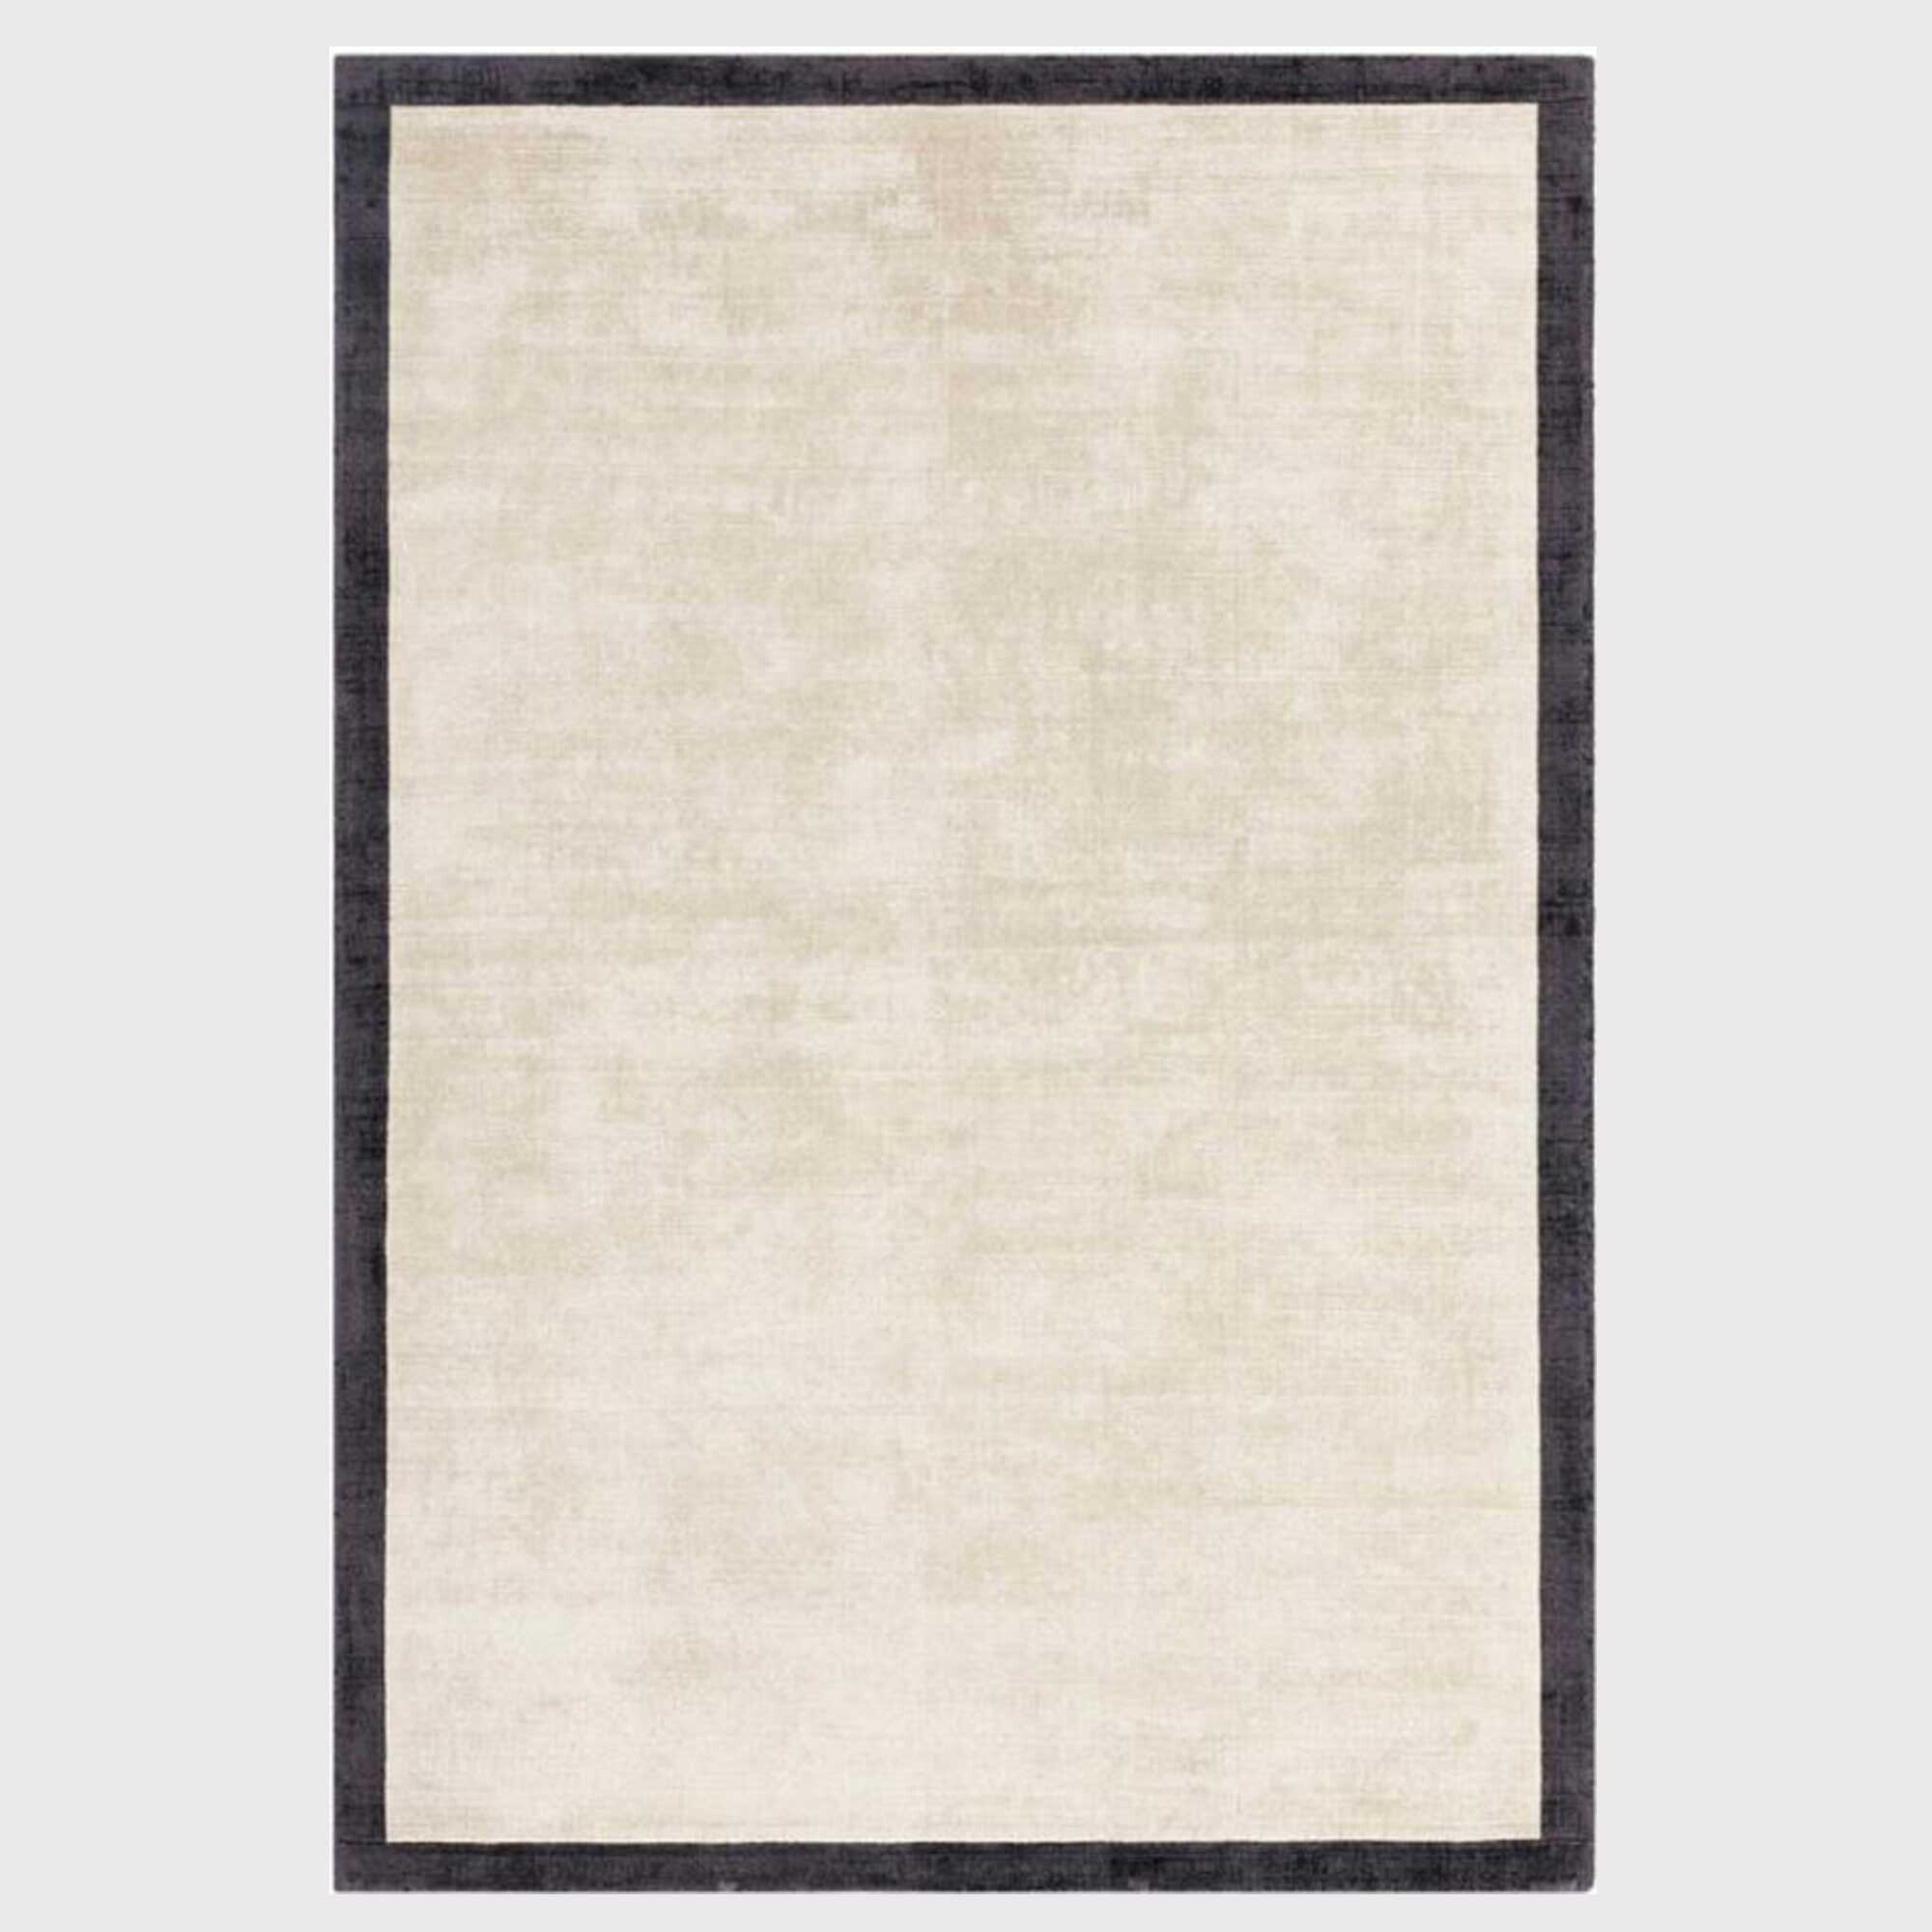 Tyde Border Rug 160x230cm Putty/Charcoal, Square, Neutral Viscose | Barker & Stonehouse